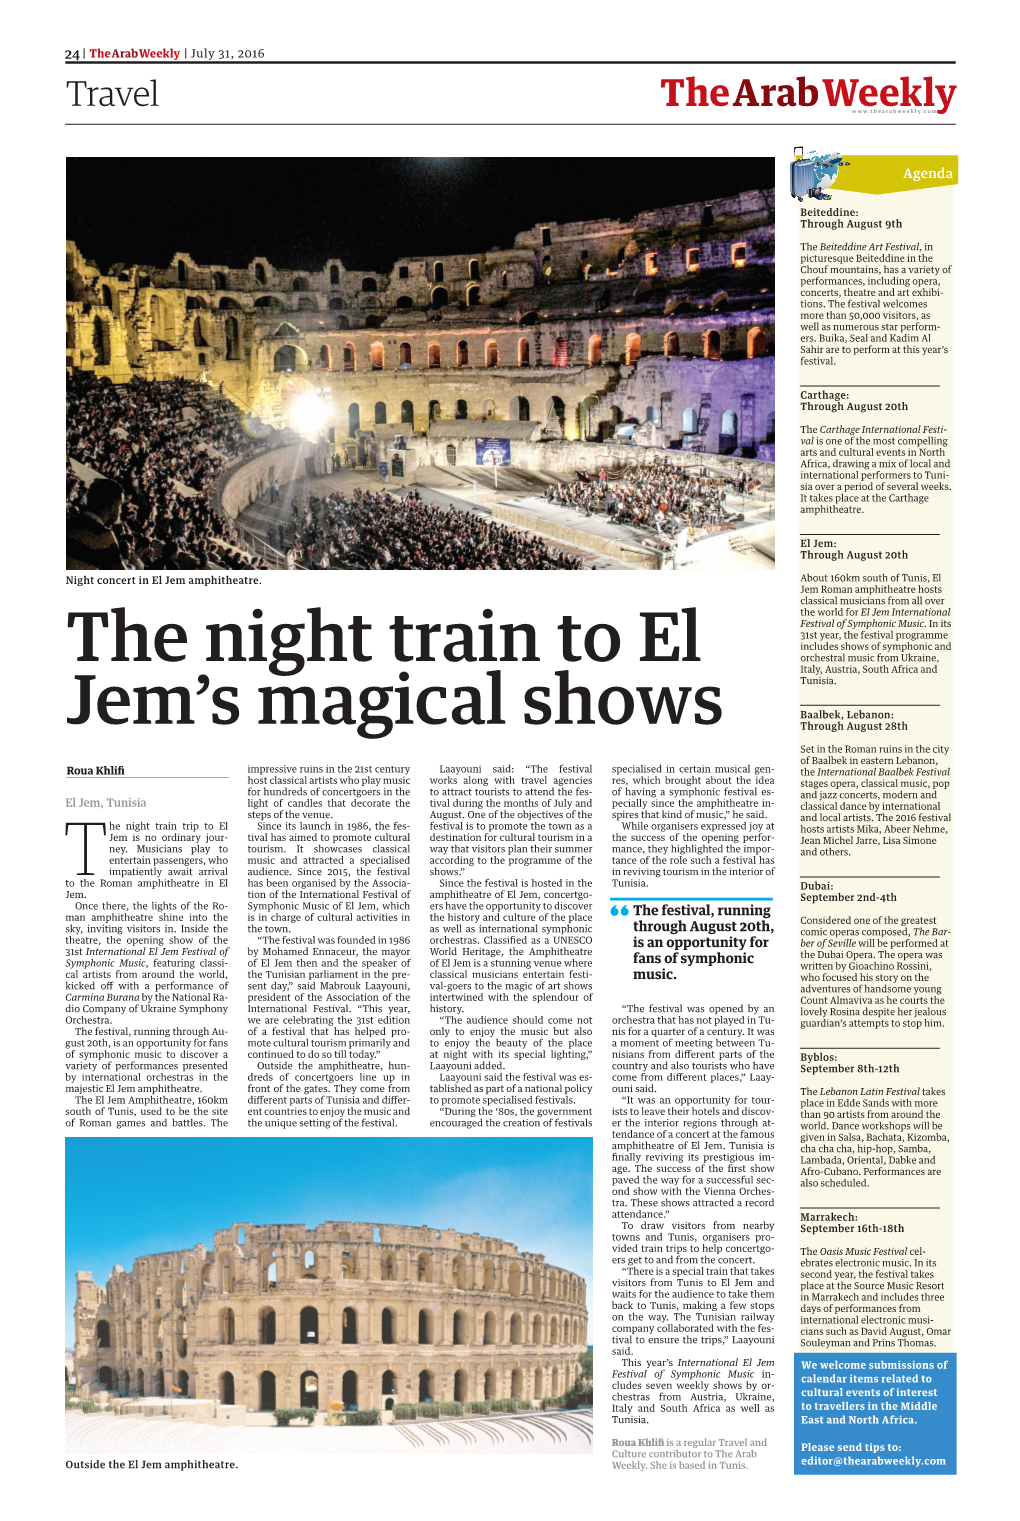 The Night Train to El Jem's Magical Shows